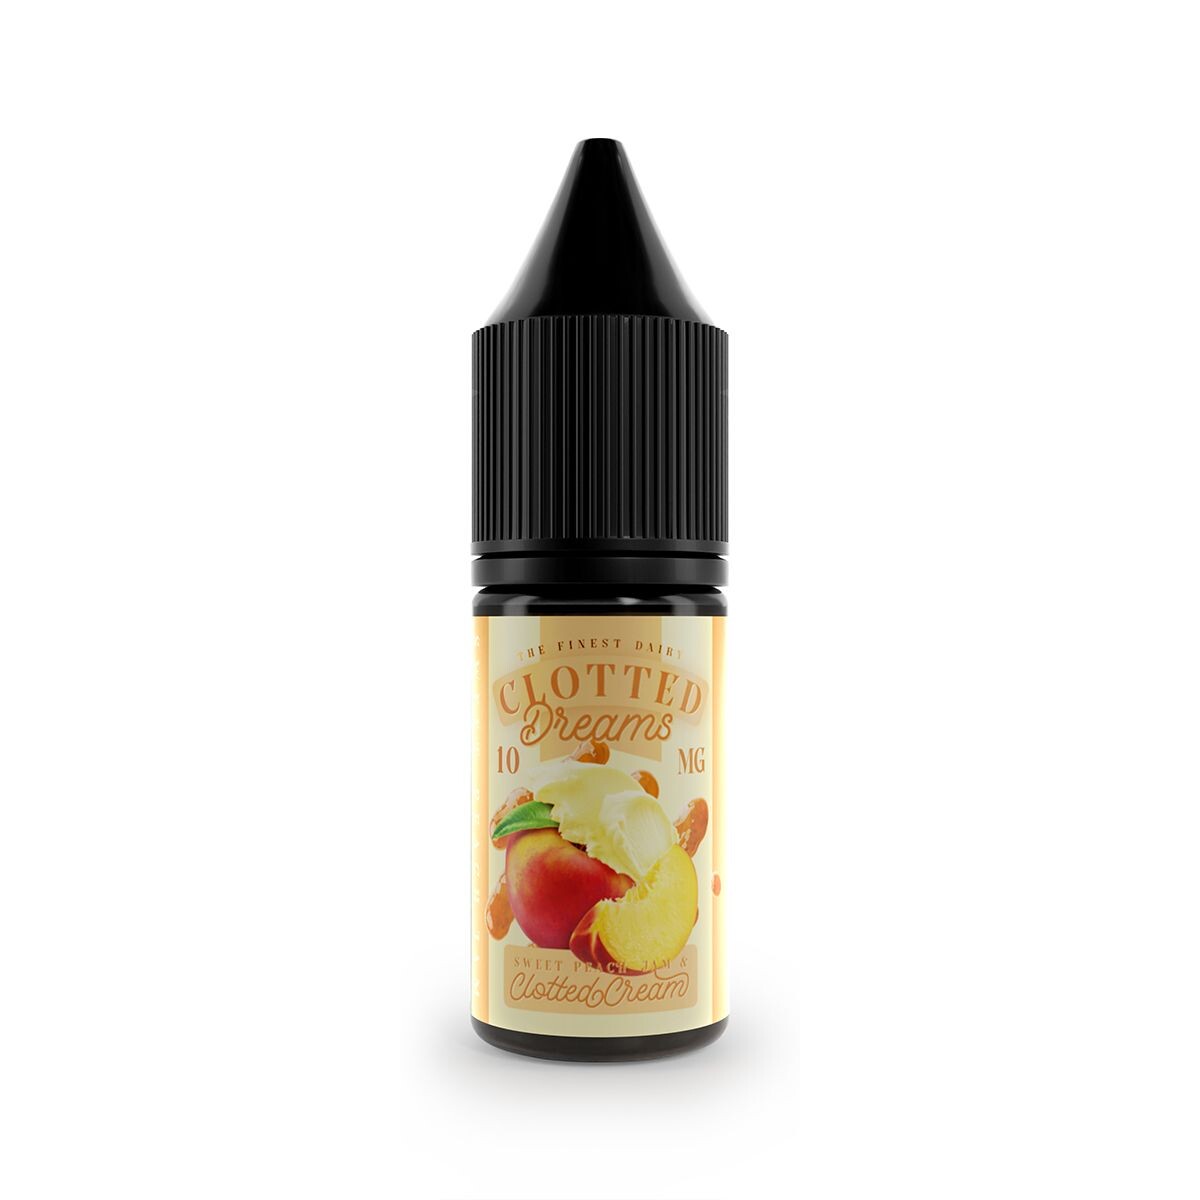 sweet peach jam and clotted cream flavour e-liquid nicotine salt by clotted dreams